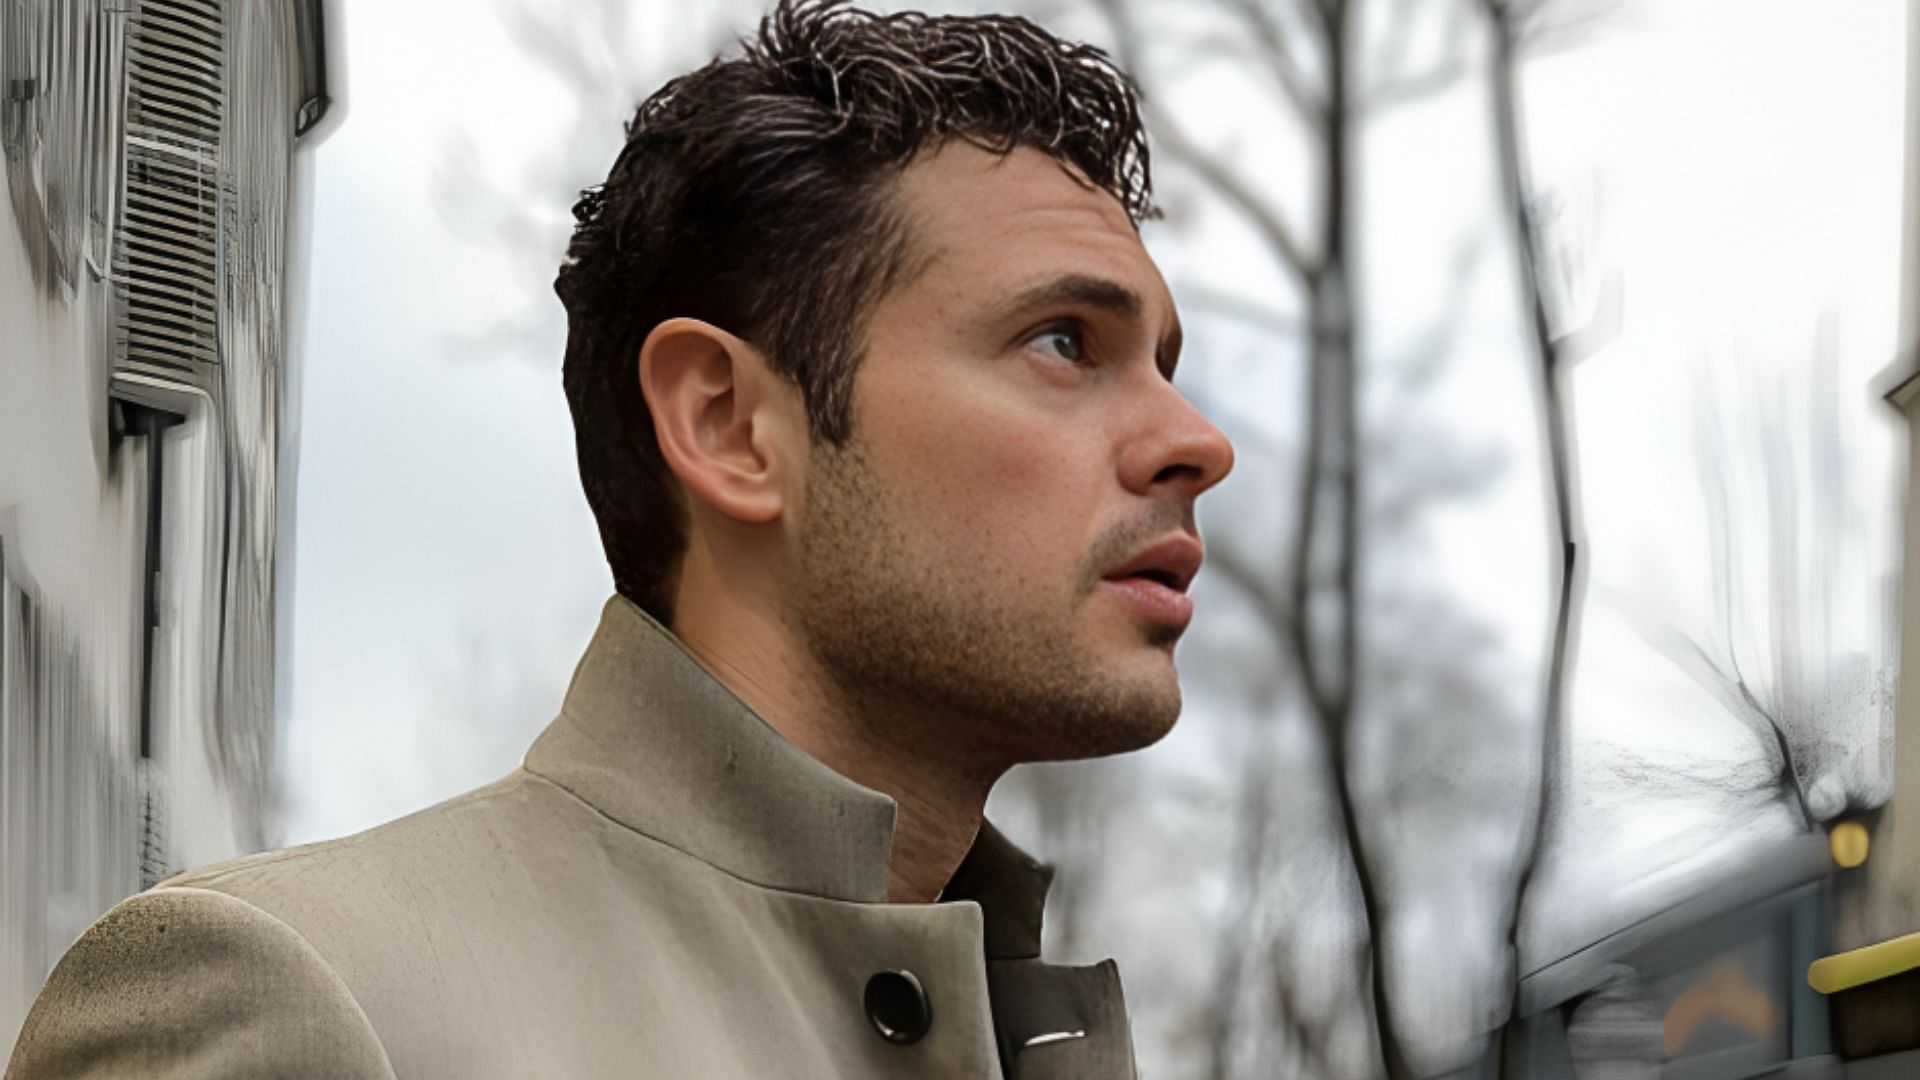 Actor Adan Canto played the character Arman Morales in The Cleaning Lady (Image via Instagram/@adancanto)